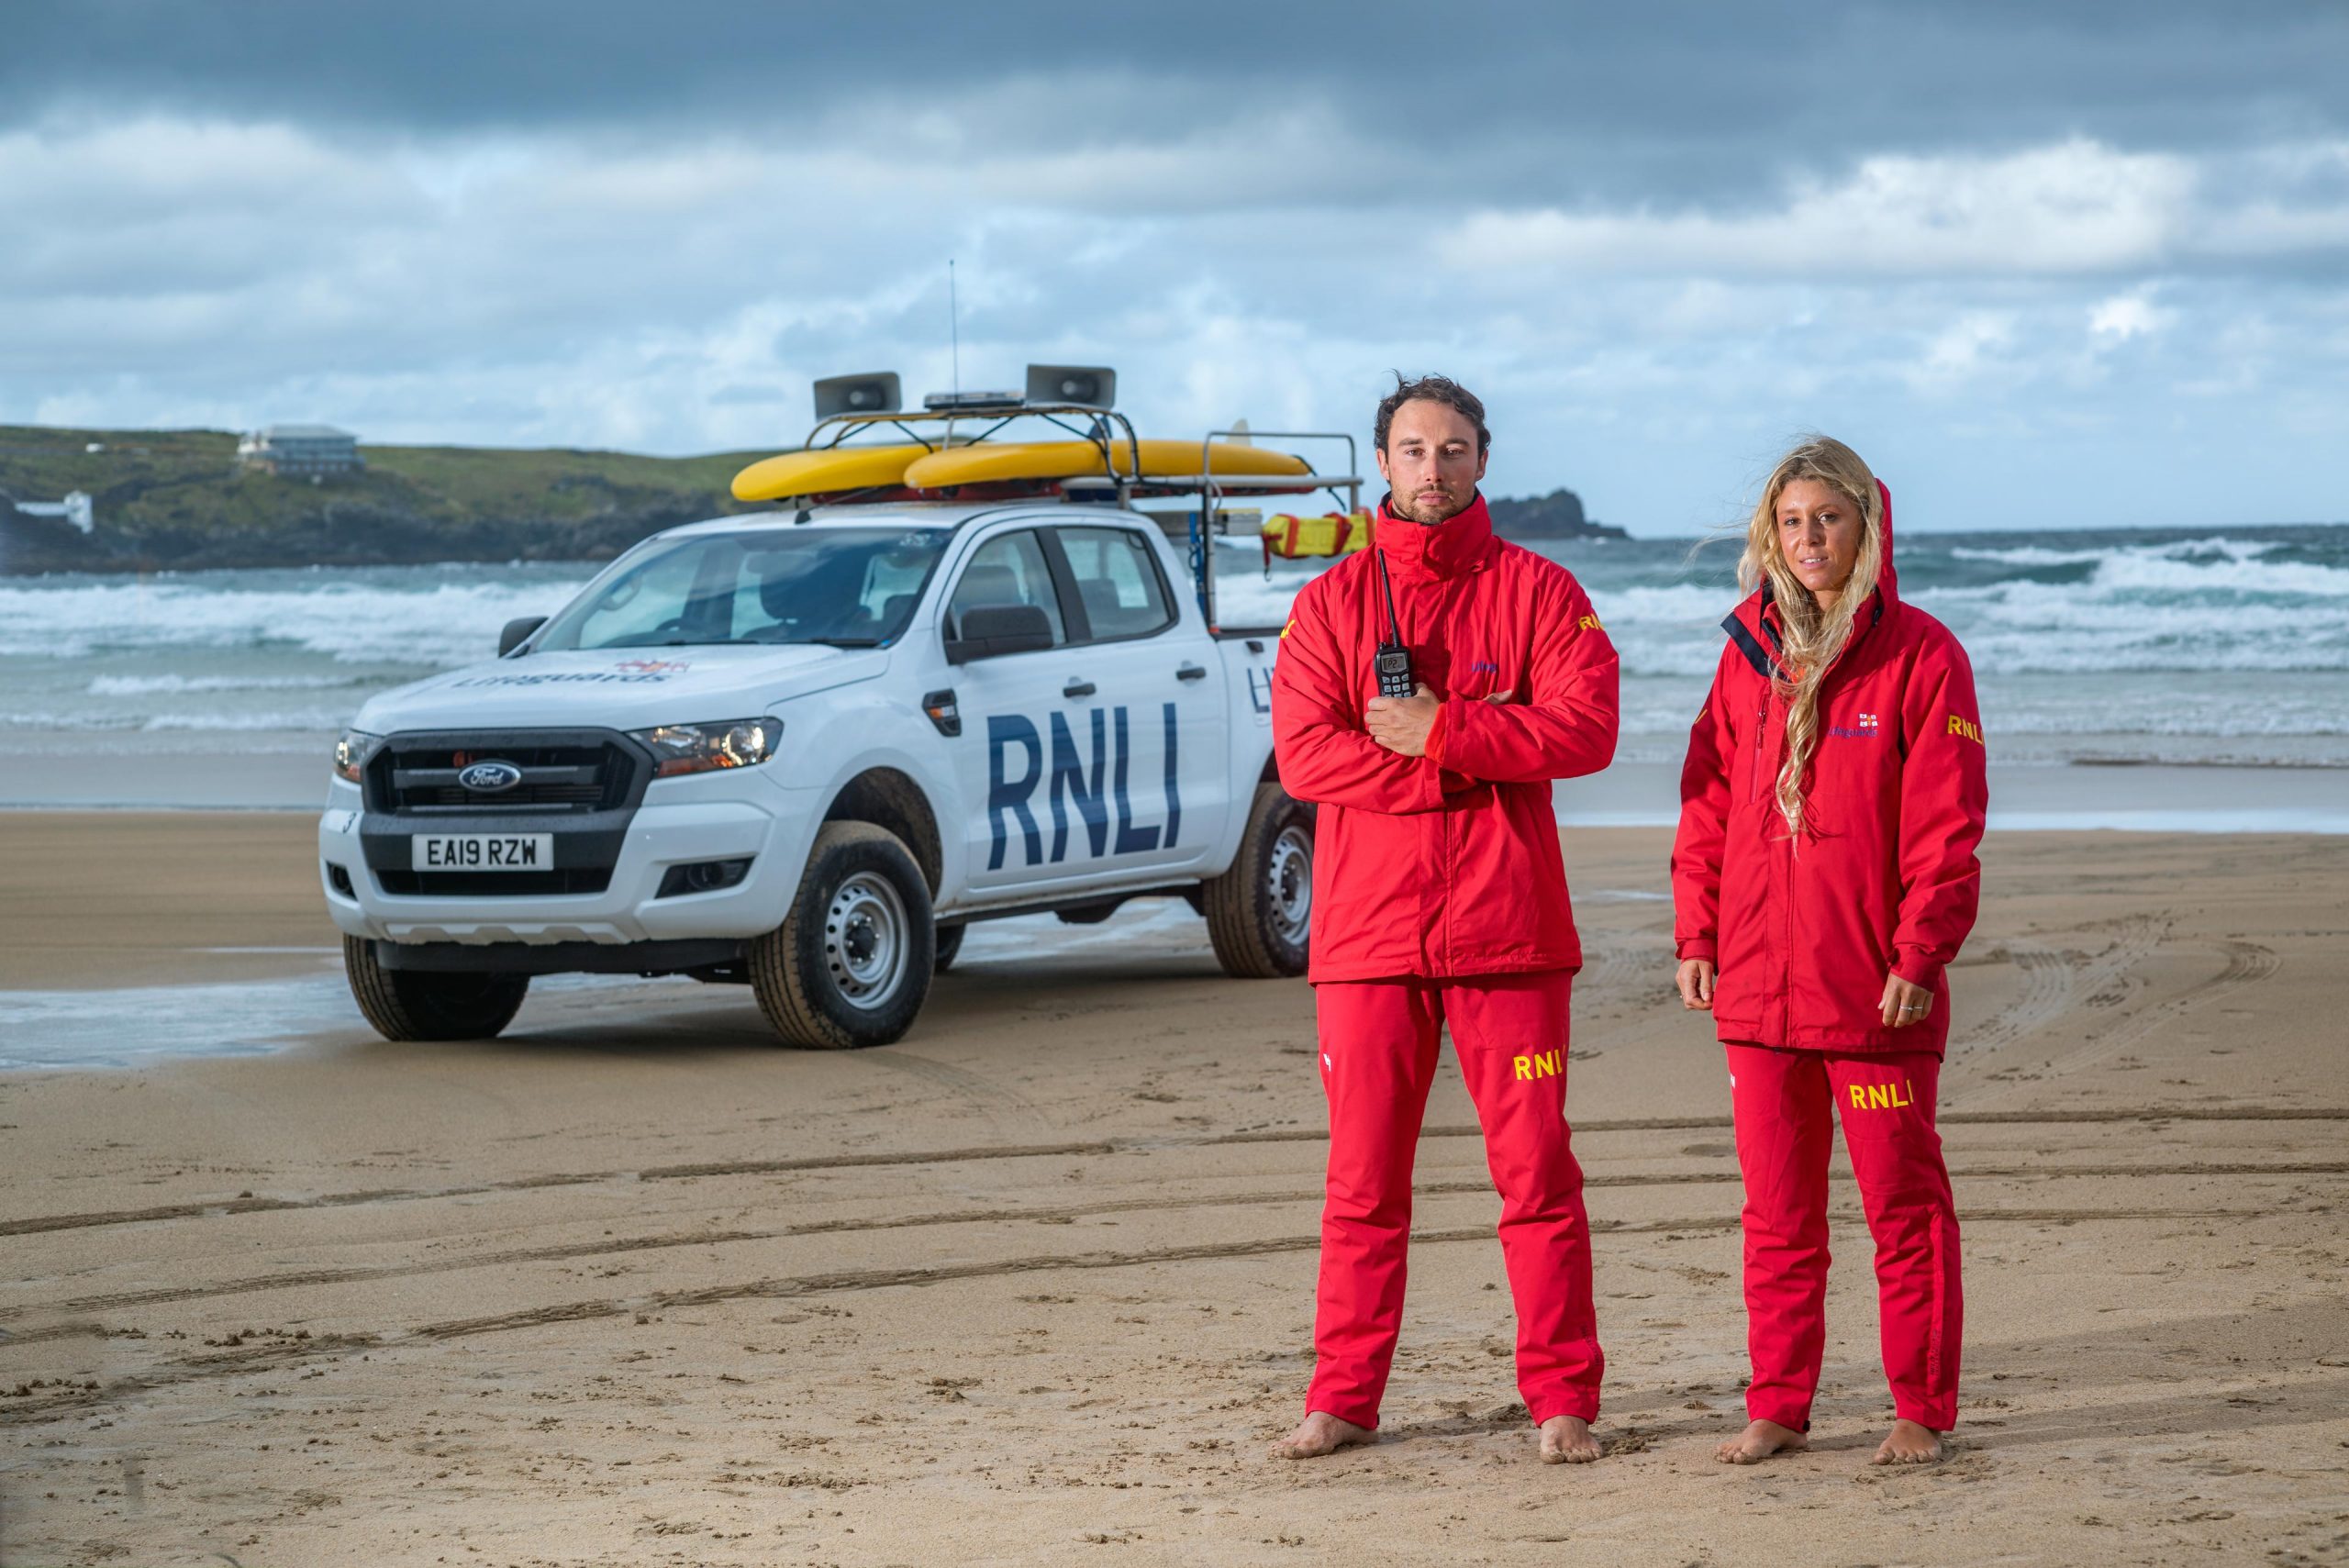 Two lifeguards from the RNLI stand on the beach in their red uniforms, with a Ford pickup truck in the background. The scene captures the dedication and readiness of the lifeguards during an open event, as captured by Wright Content." Caption: "Safety First: RNLI Lifeguards on Duty